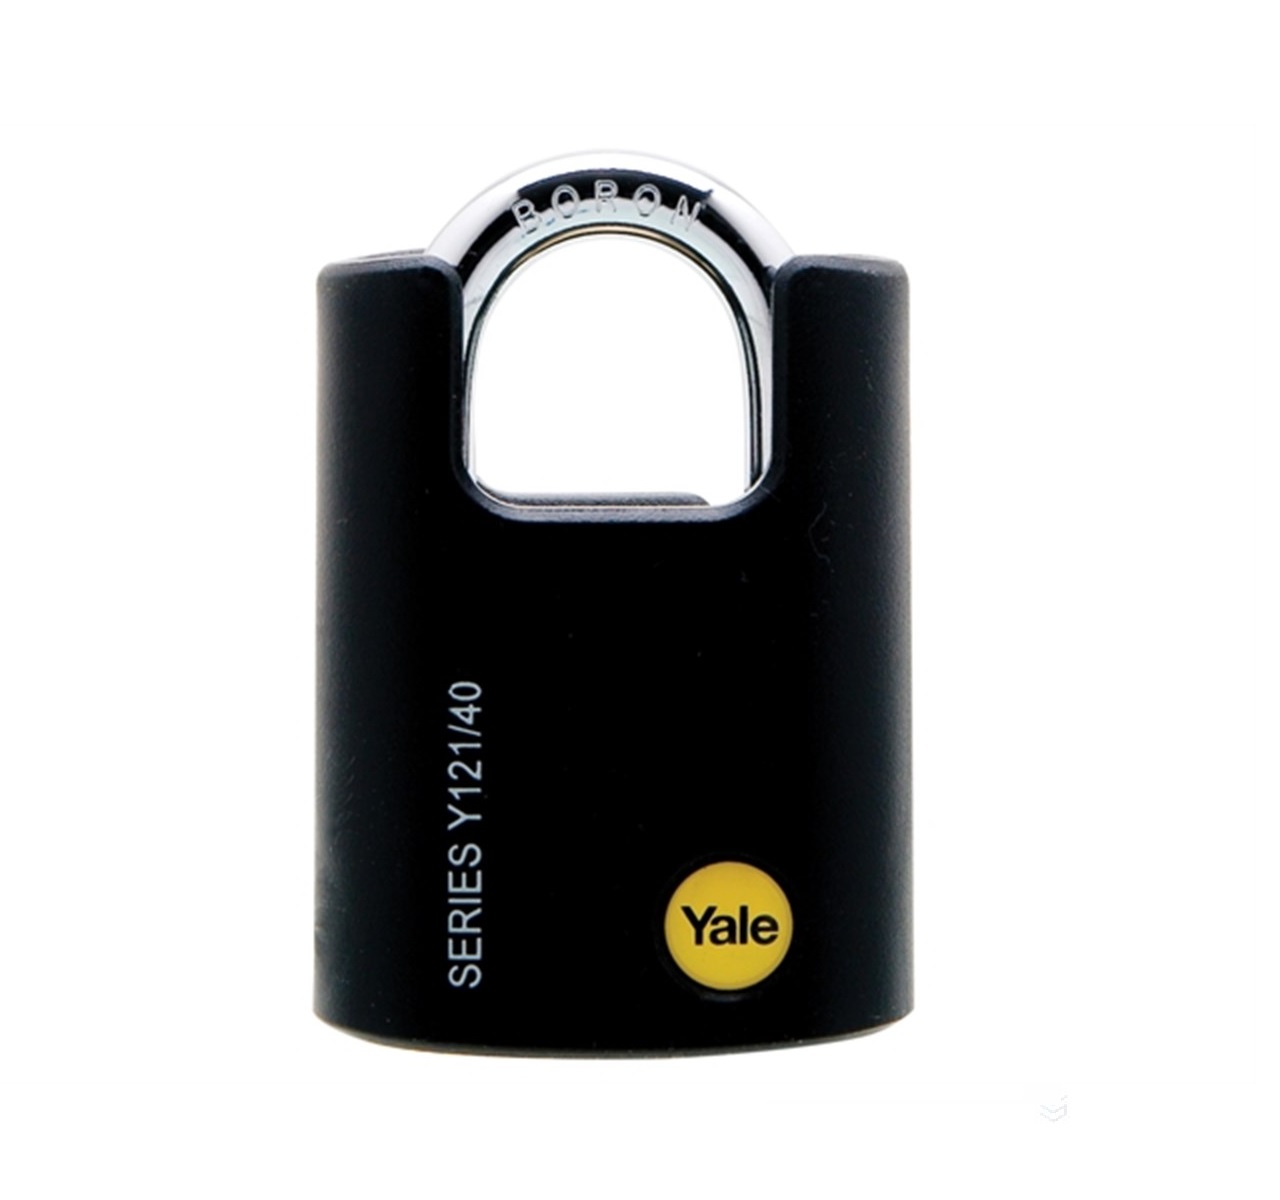 Yale Y121-40-125-1 Black 40MM Closed Shackle Padlock Comes With 3 Keys